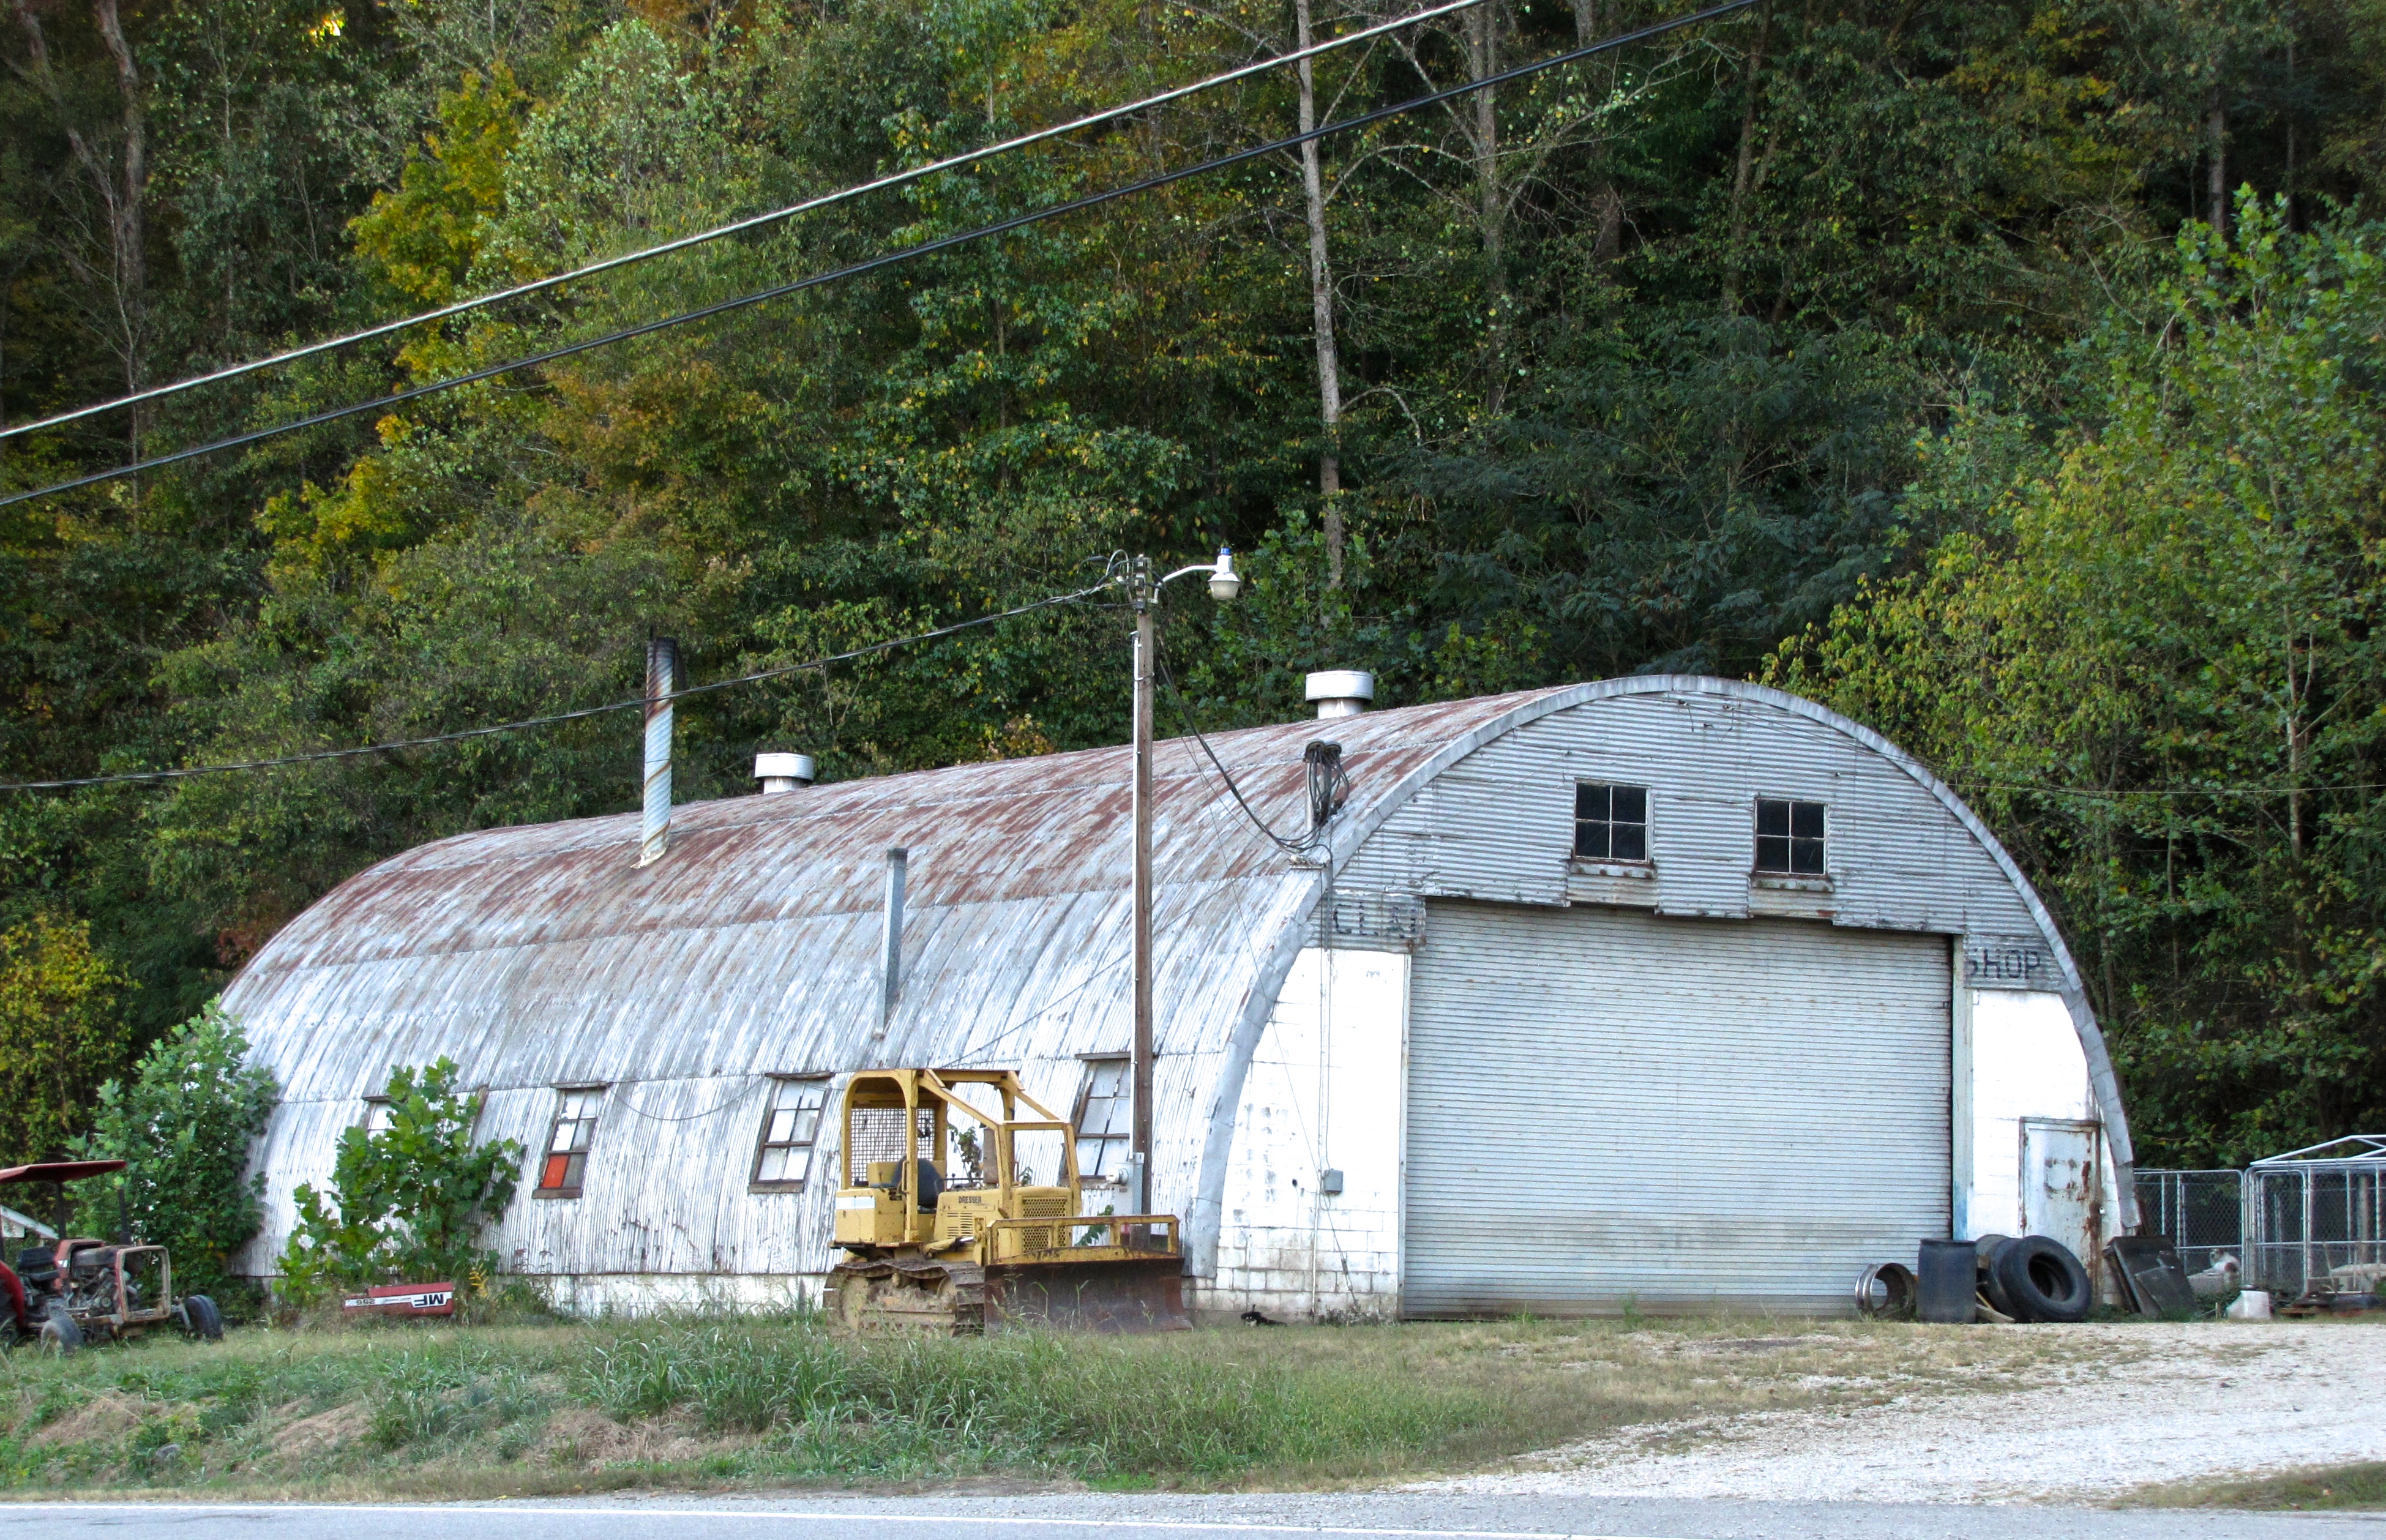 quonset hut in Jericho, VT